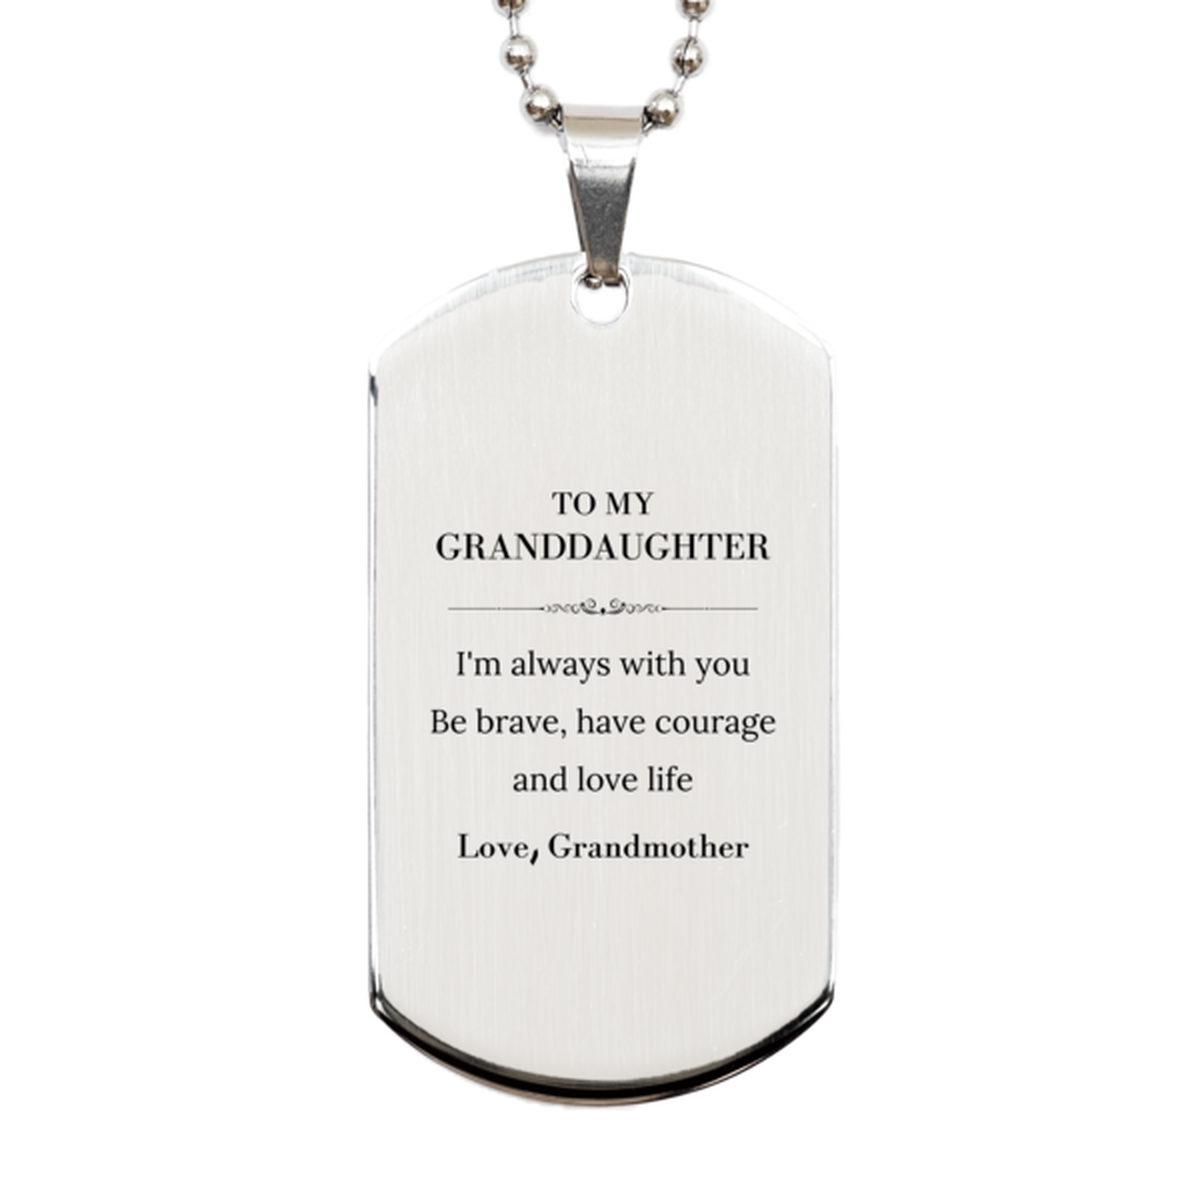 To My Granddaughter Gifts from Grandmother, Unique Silver Dog Tag Inspirational Christmas Birthday Graduation Gifts for Granddaughter I'm always with you. Be brave, have courage and love life. Love, Grandmother